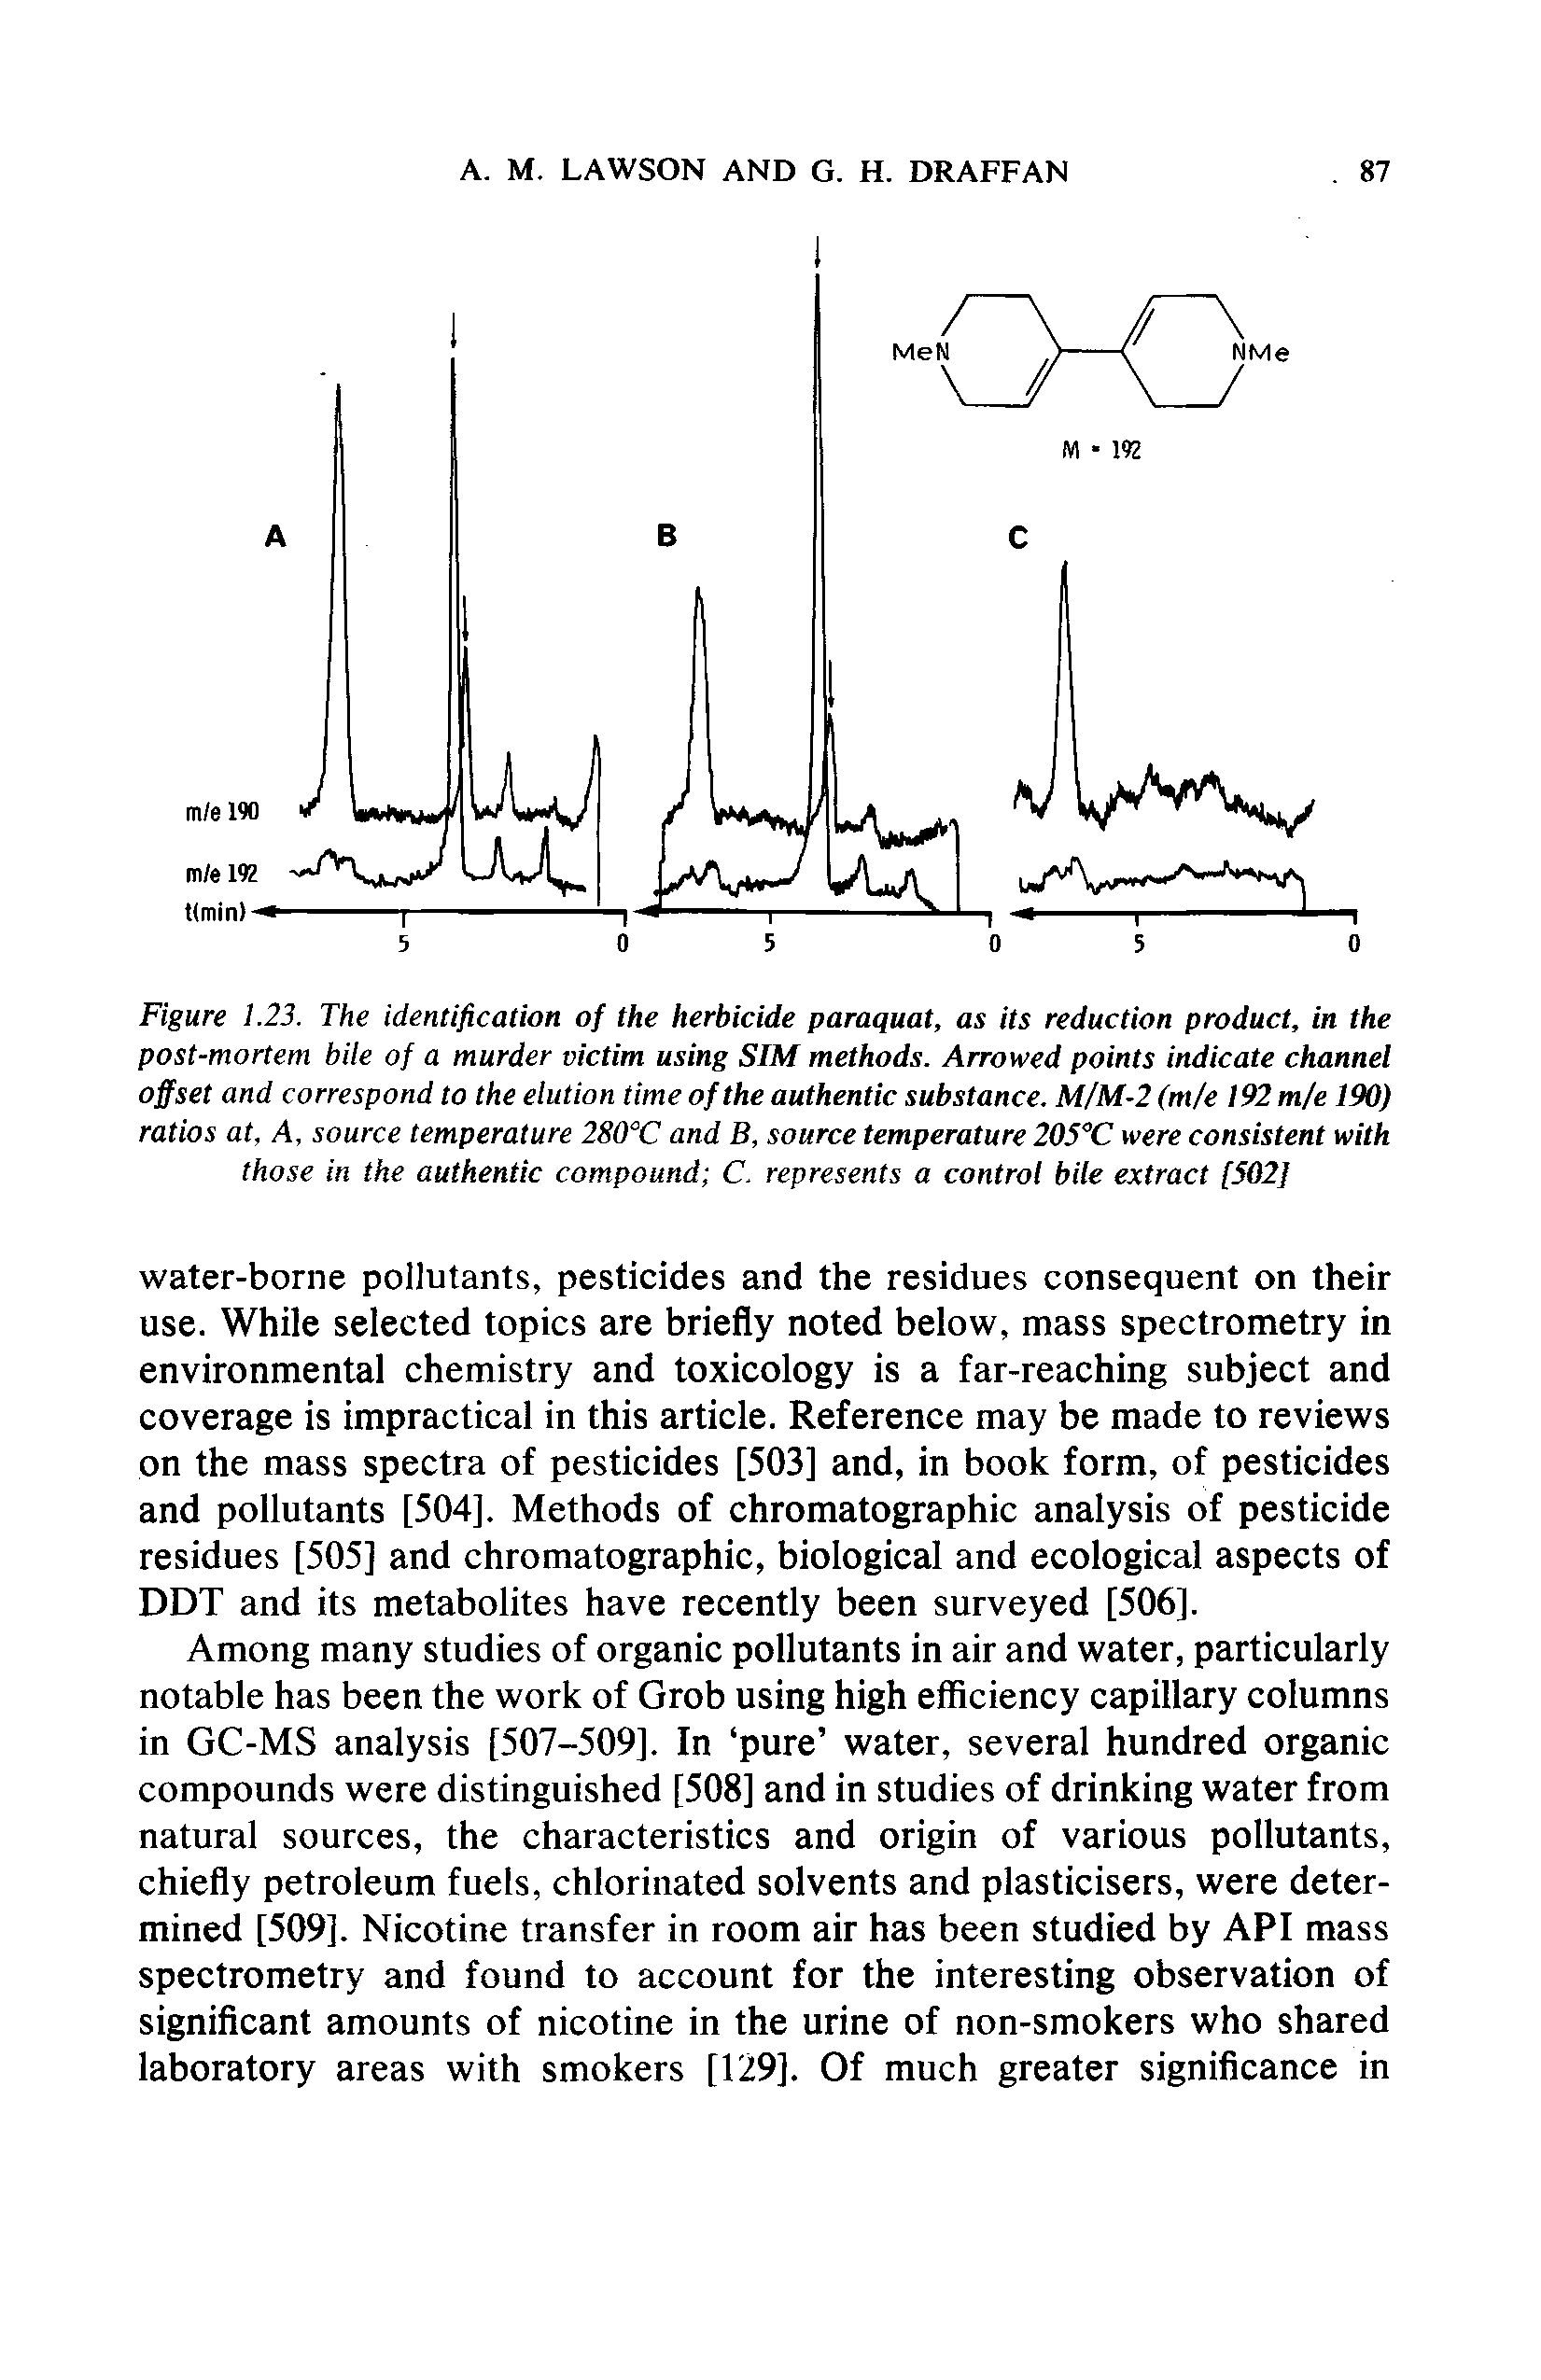 Figure 1.23. The identification of the herbicide paraquat, as its reduction product, in the post-mortem bile of a murder victim using SIM methods. Arrowed points indicate channel offset and correspond to the elution time of the authentic substance. M/M-2 (m/e 192 m/e 190) ratios at, A, source temperature 280°C and B, source temperature 205°C were consistent with those in the authentic compound C. represents a control bile extract [502]...